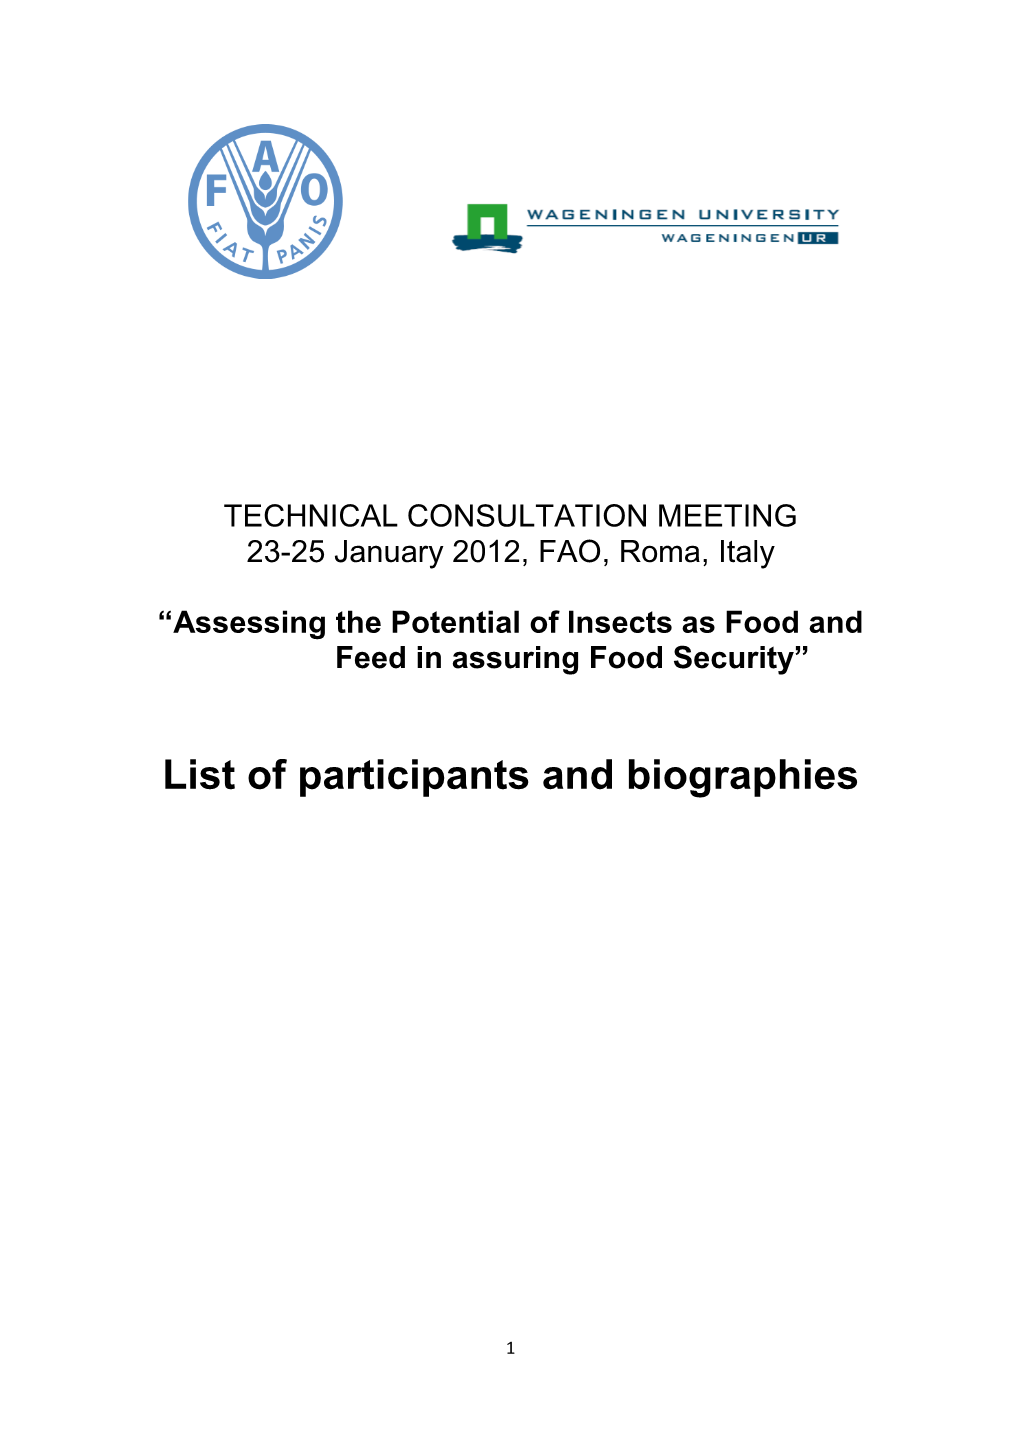 List of Participants and Biographies